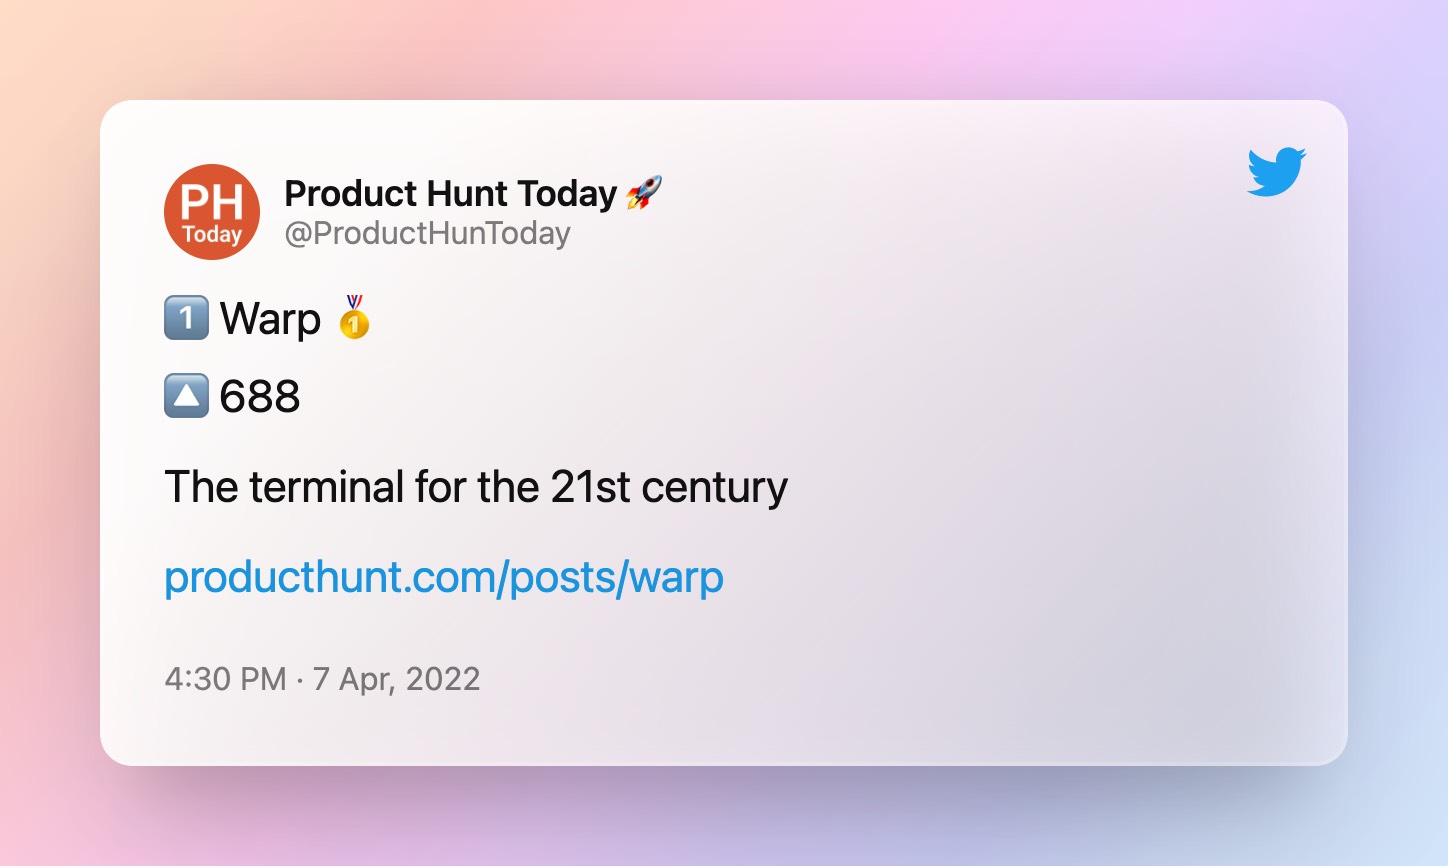 Thread of Product Hunt Today